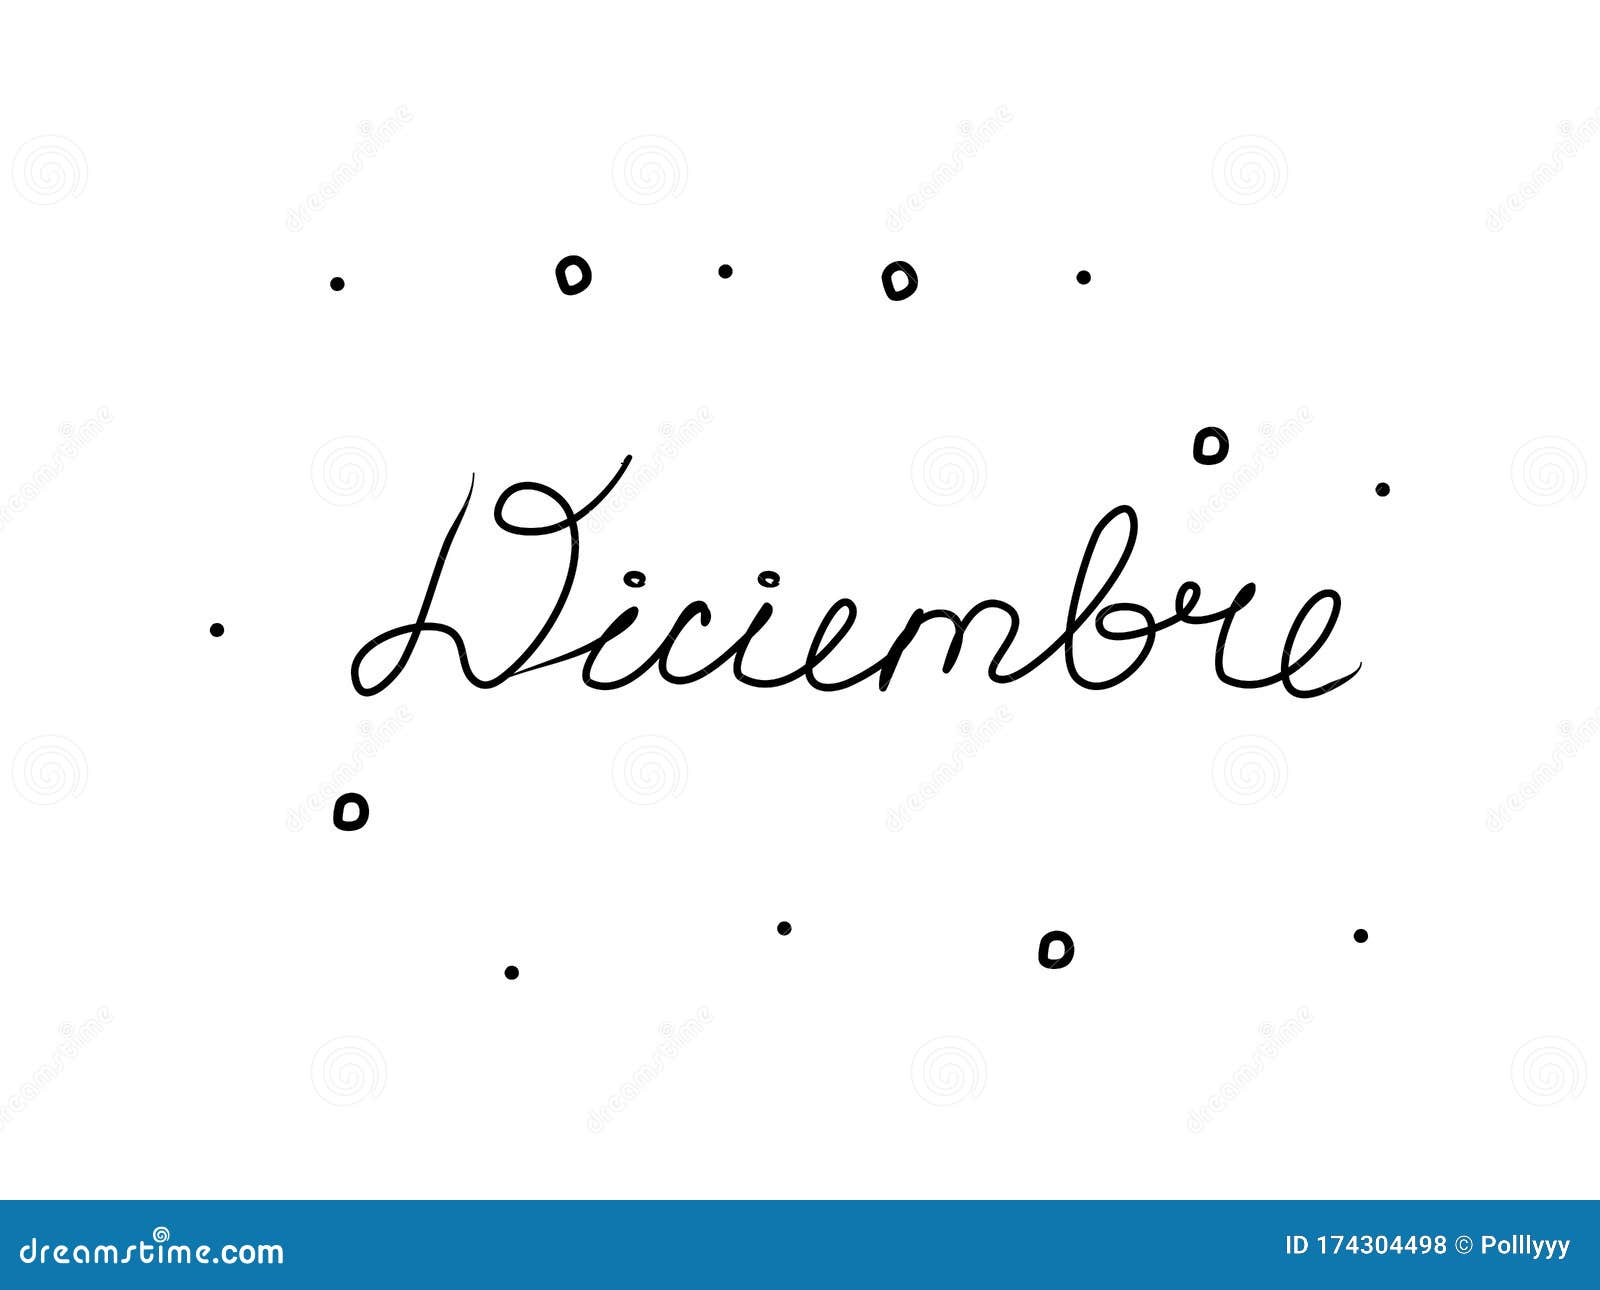 diciembre phrase handwritten with a calligraphy brush. december in spanish. modern brush calligraphy.  word black